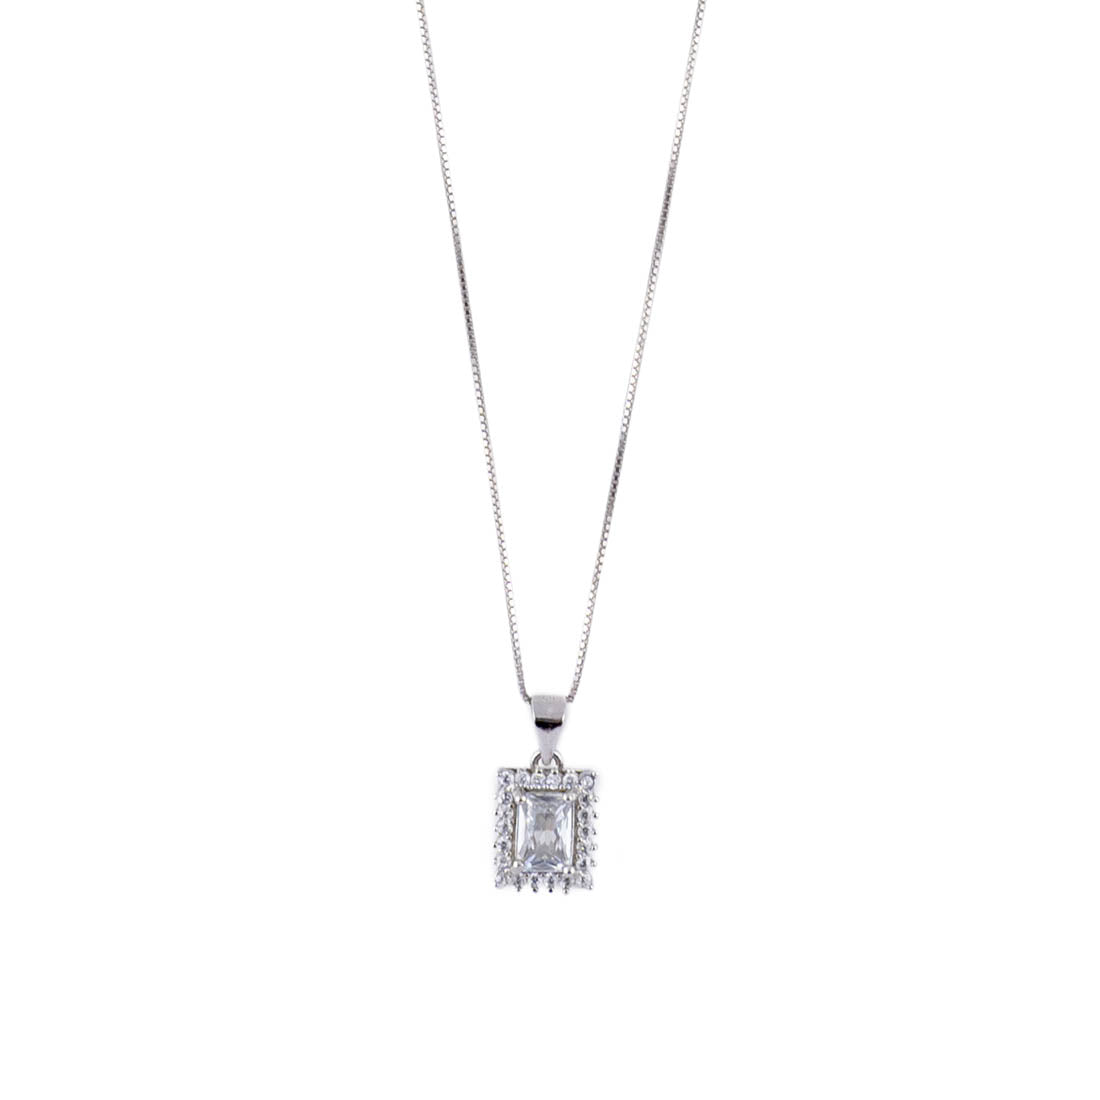 Silver Set Chain Rectangular Pendant with Earrings with Stones for Women